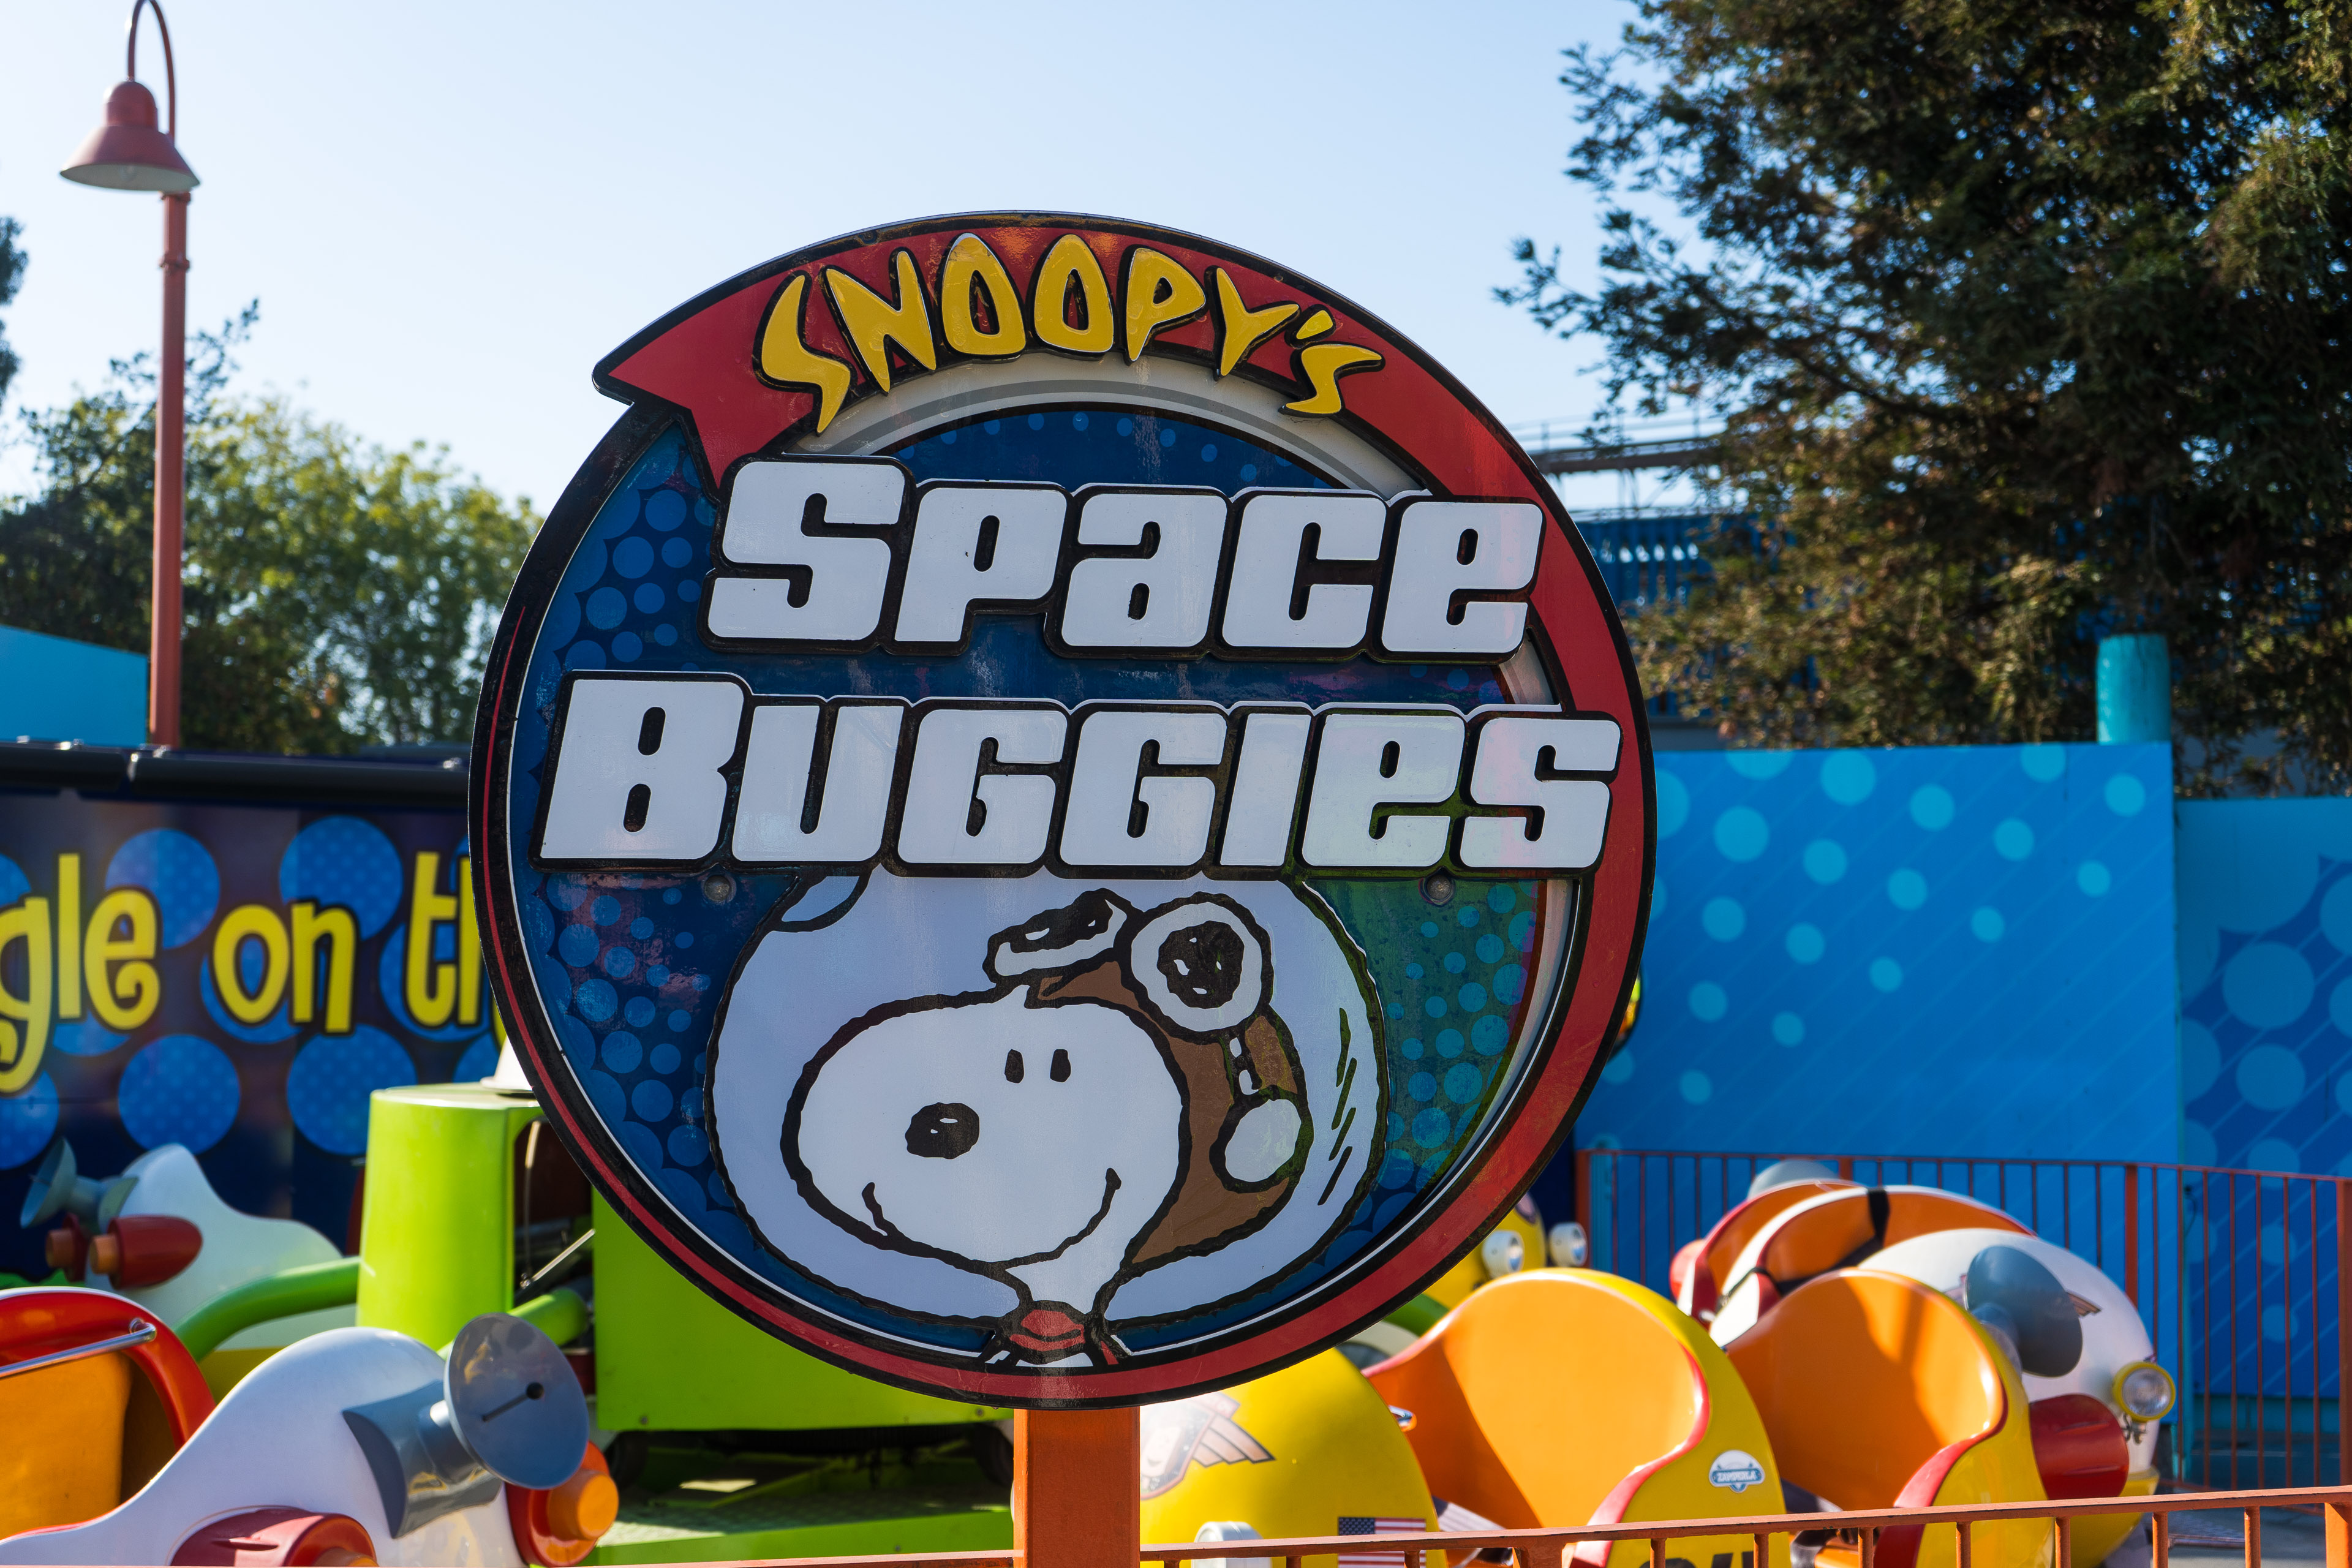 Snoopy's Space Buggies